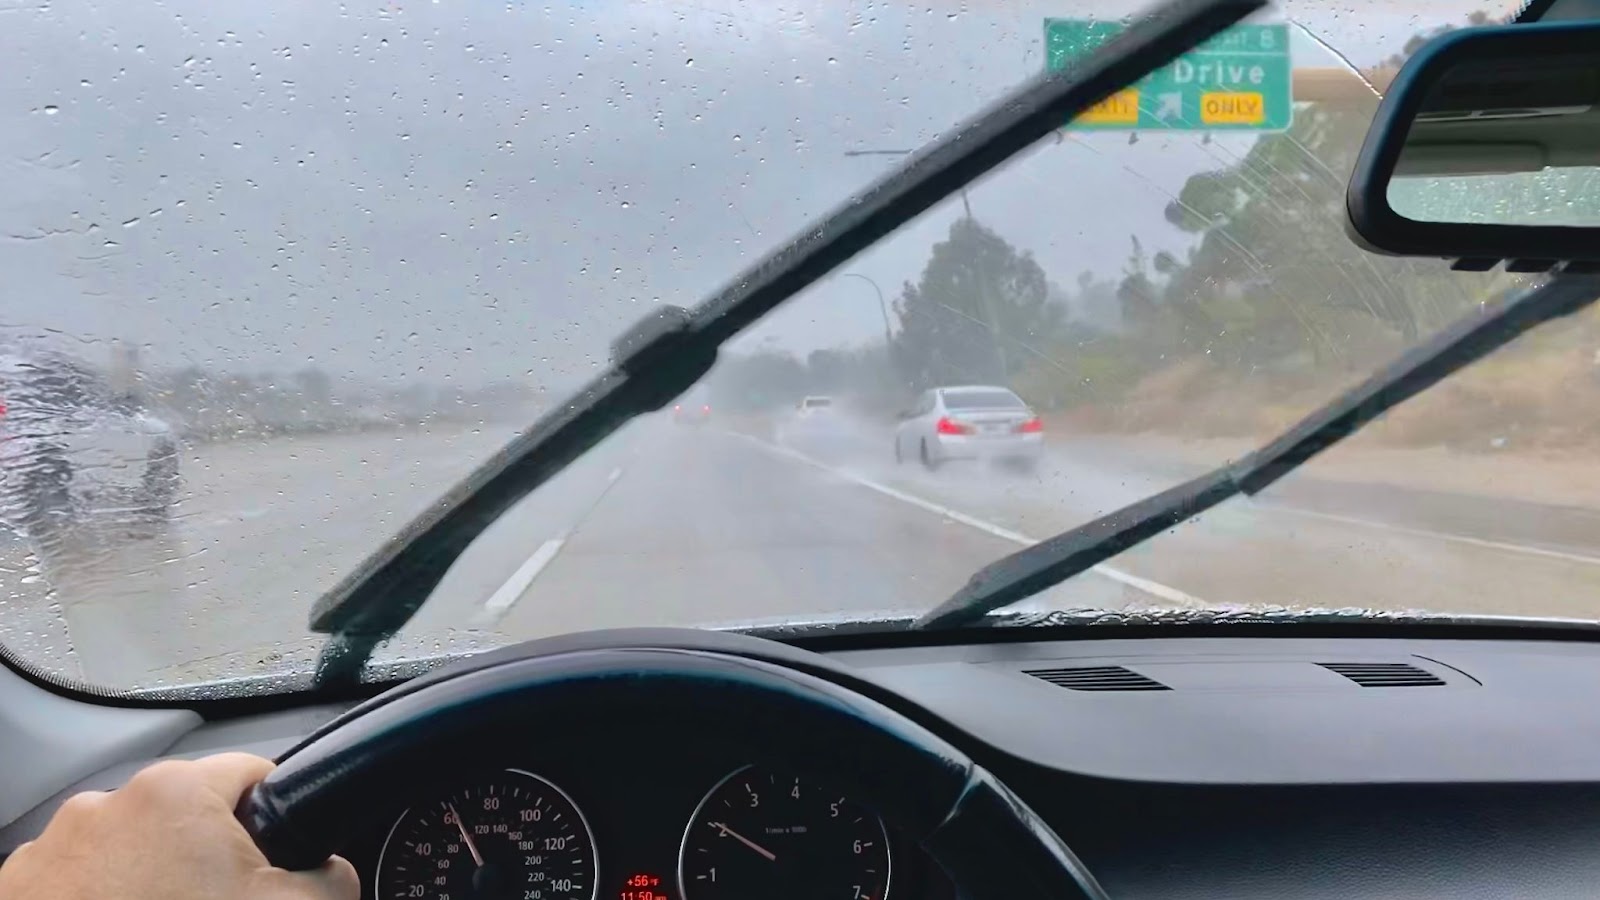 https://casselsgarage.com/wp-content/uploads/driving-in-the-car-in-the-rain-with-the-windshield-2022-11-10-10-45-38-utc.jpg